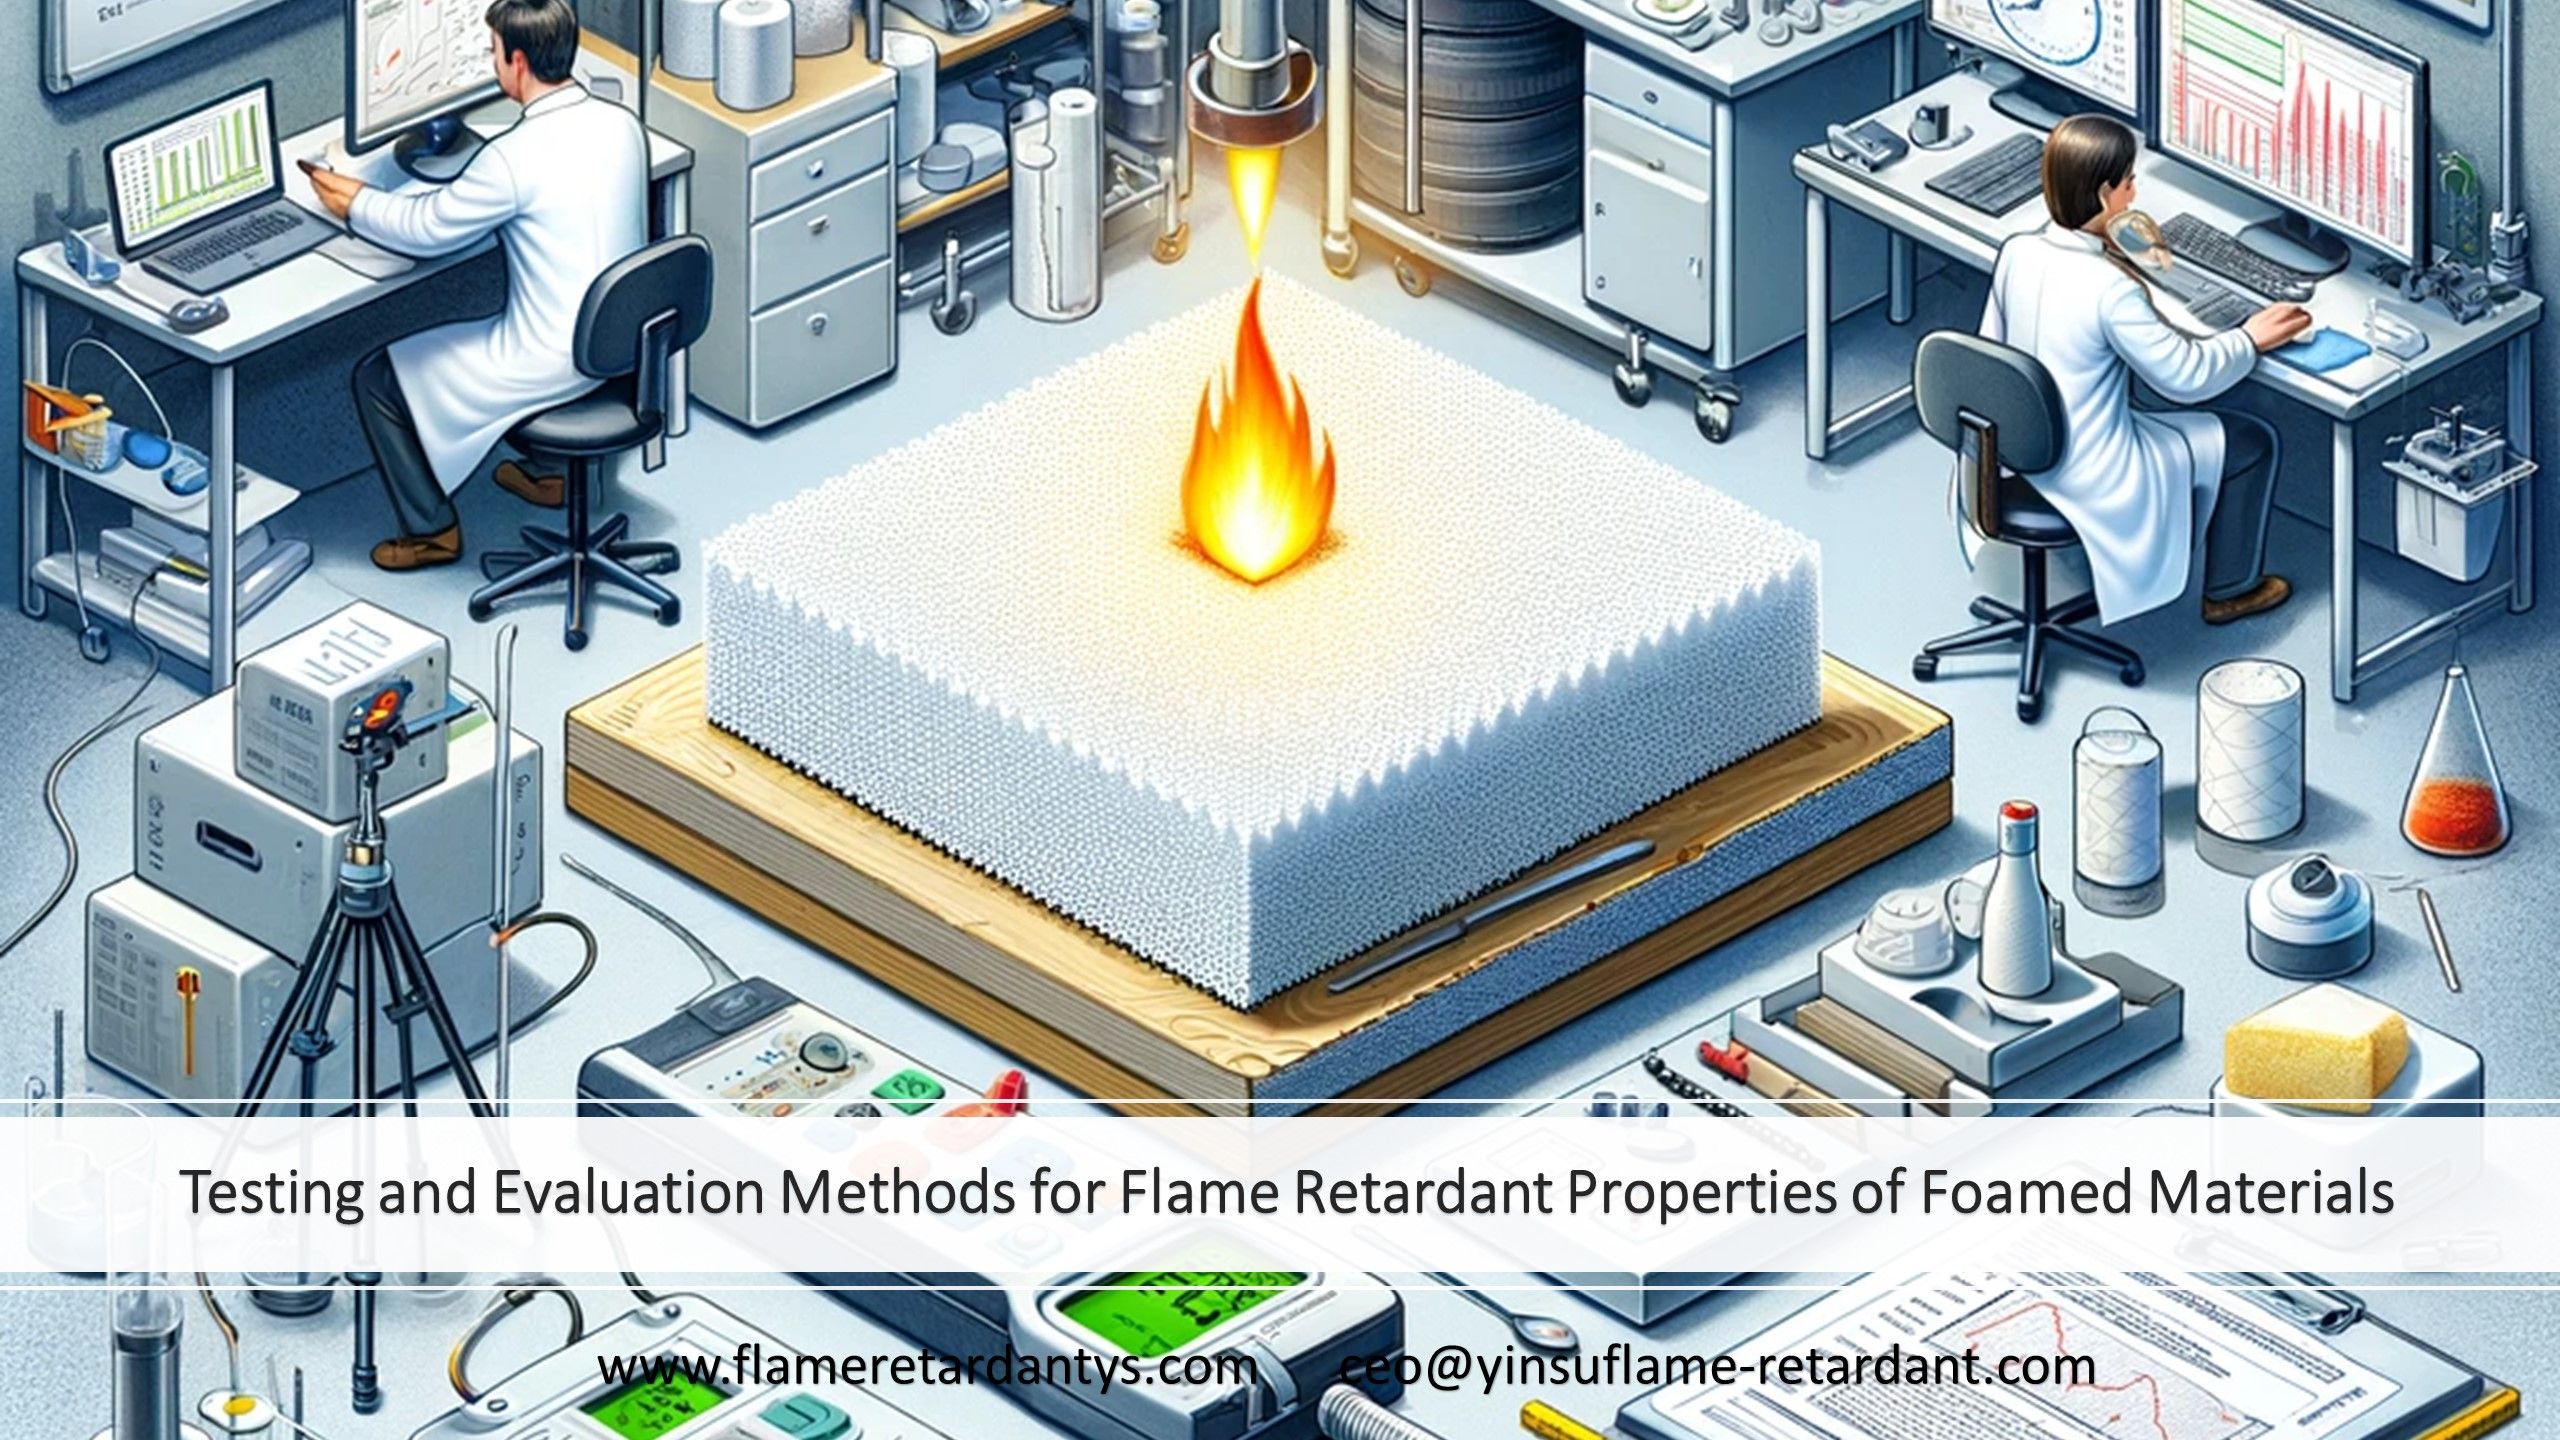 Testing and Evaluation Methods for Flame Retardant Properties of Foamed Materials